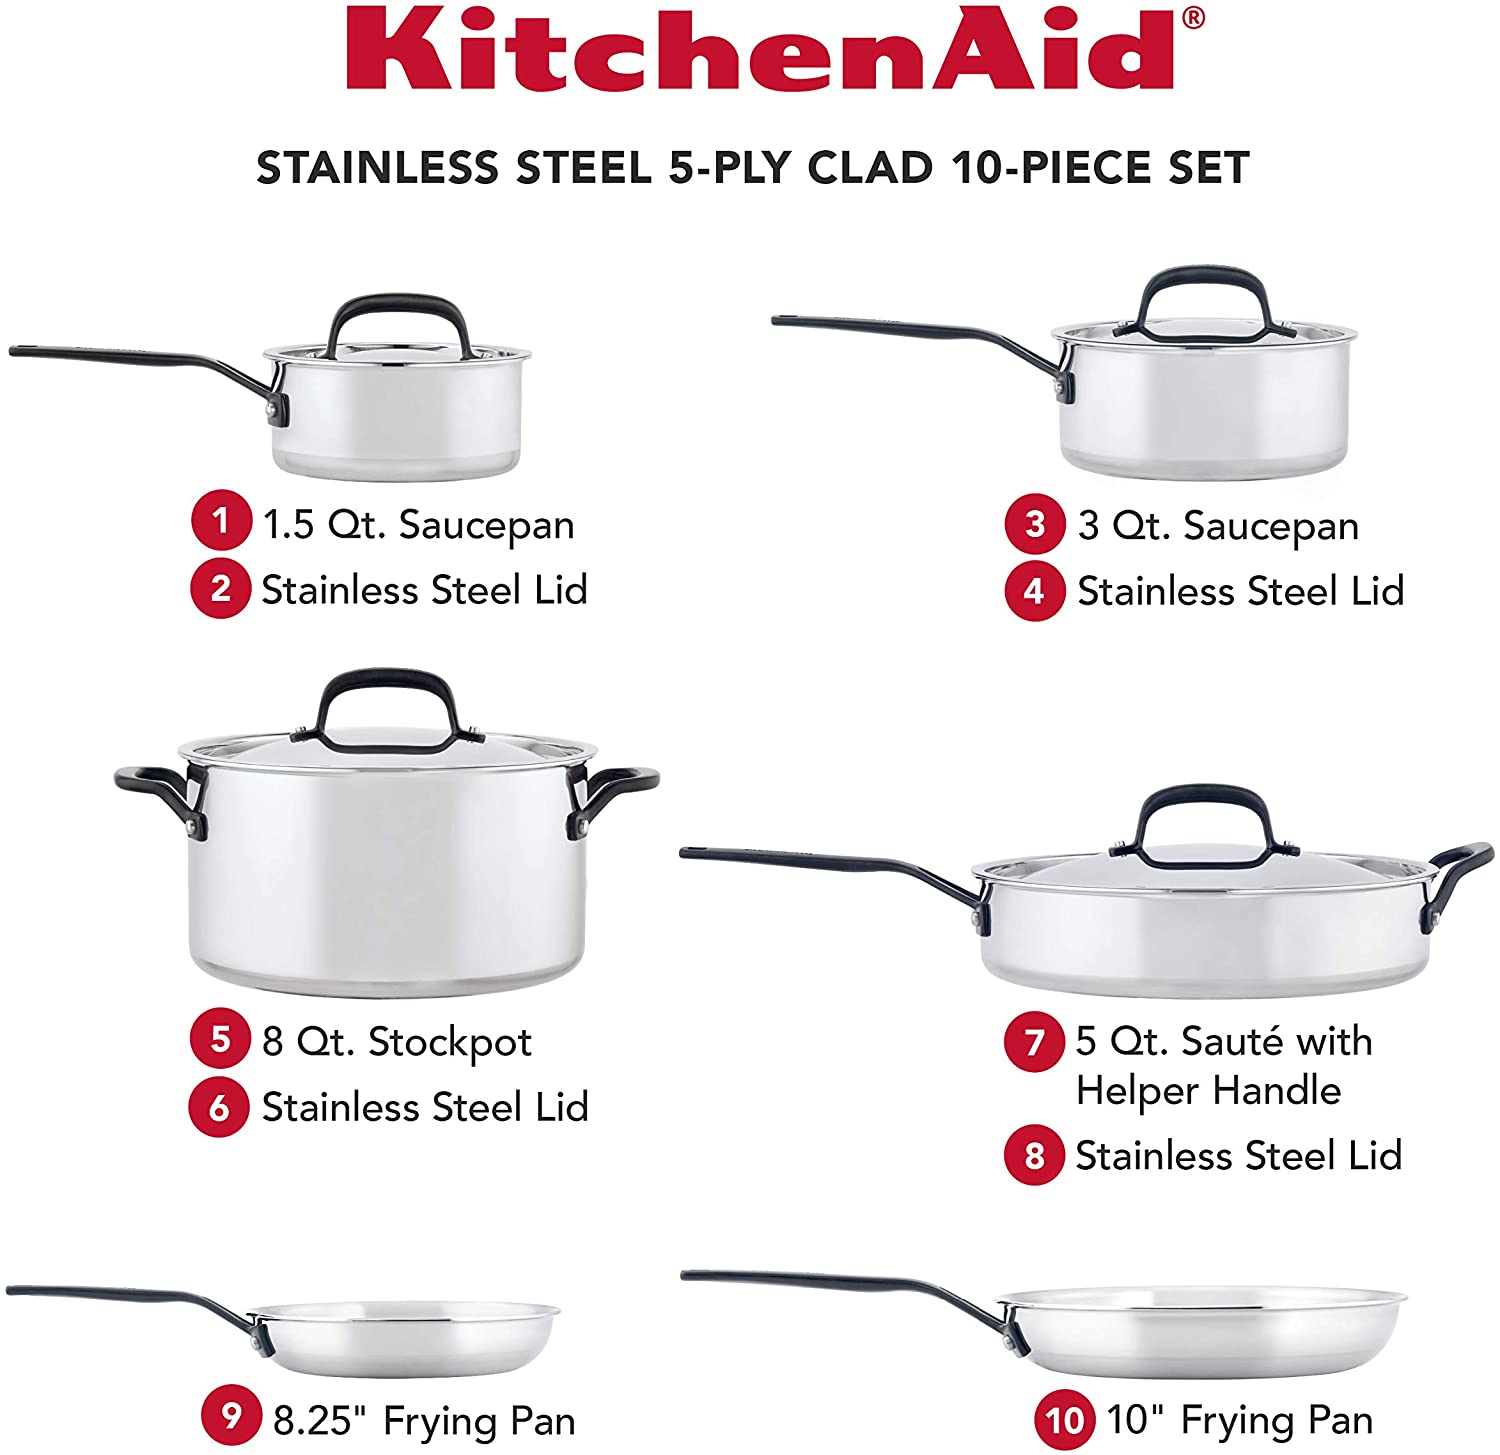 KitchenAid 5-Ply Clad Polished 10 Piece Stainless Steel Cookware Pots and Pans Set